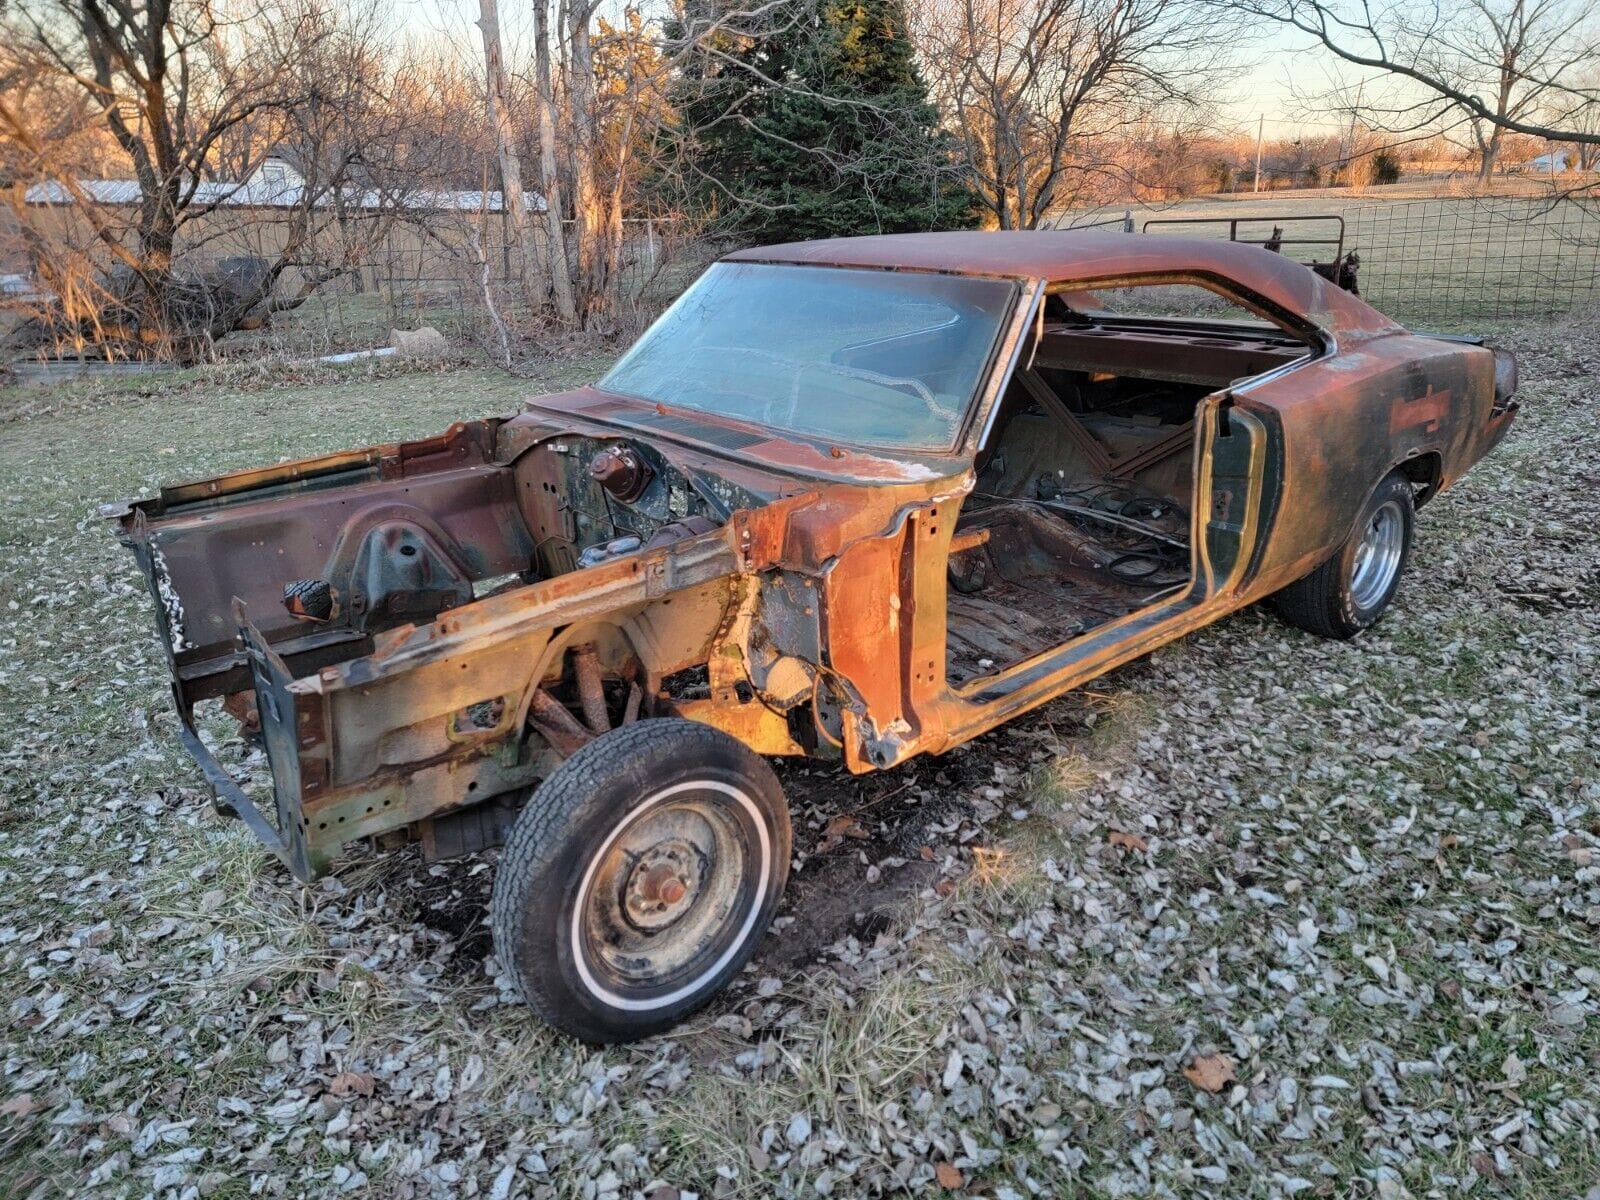 Is This Dodge Charger Project Car Worth Saving?